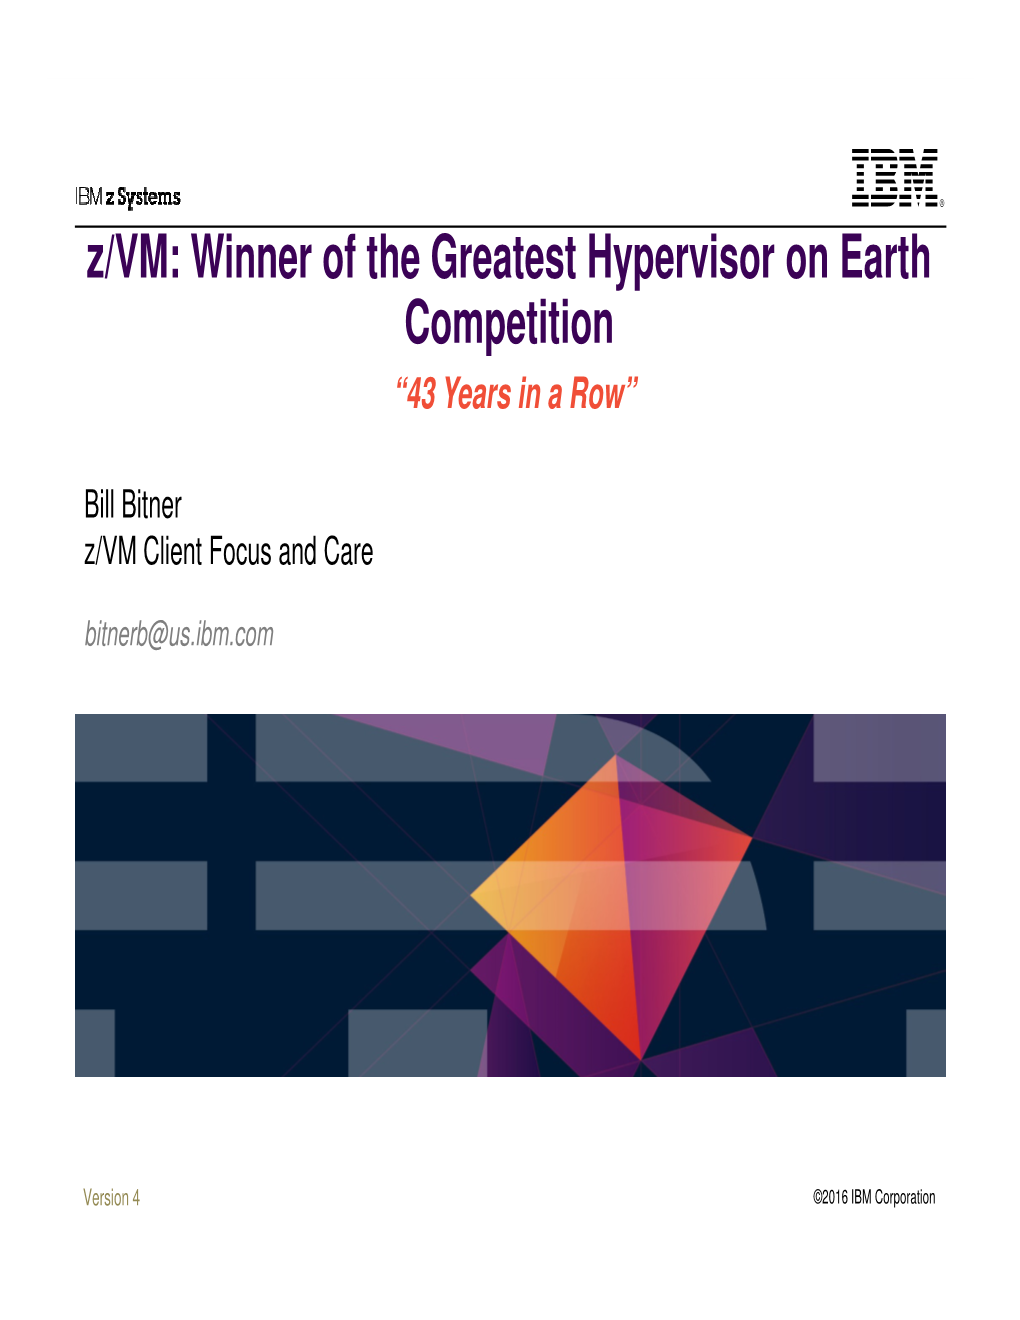 Z/VM: Winner of the Greatest Hypervisor on Earth Competition “43 Years in a Row”